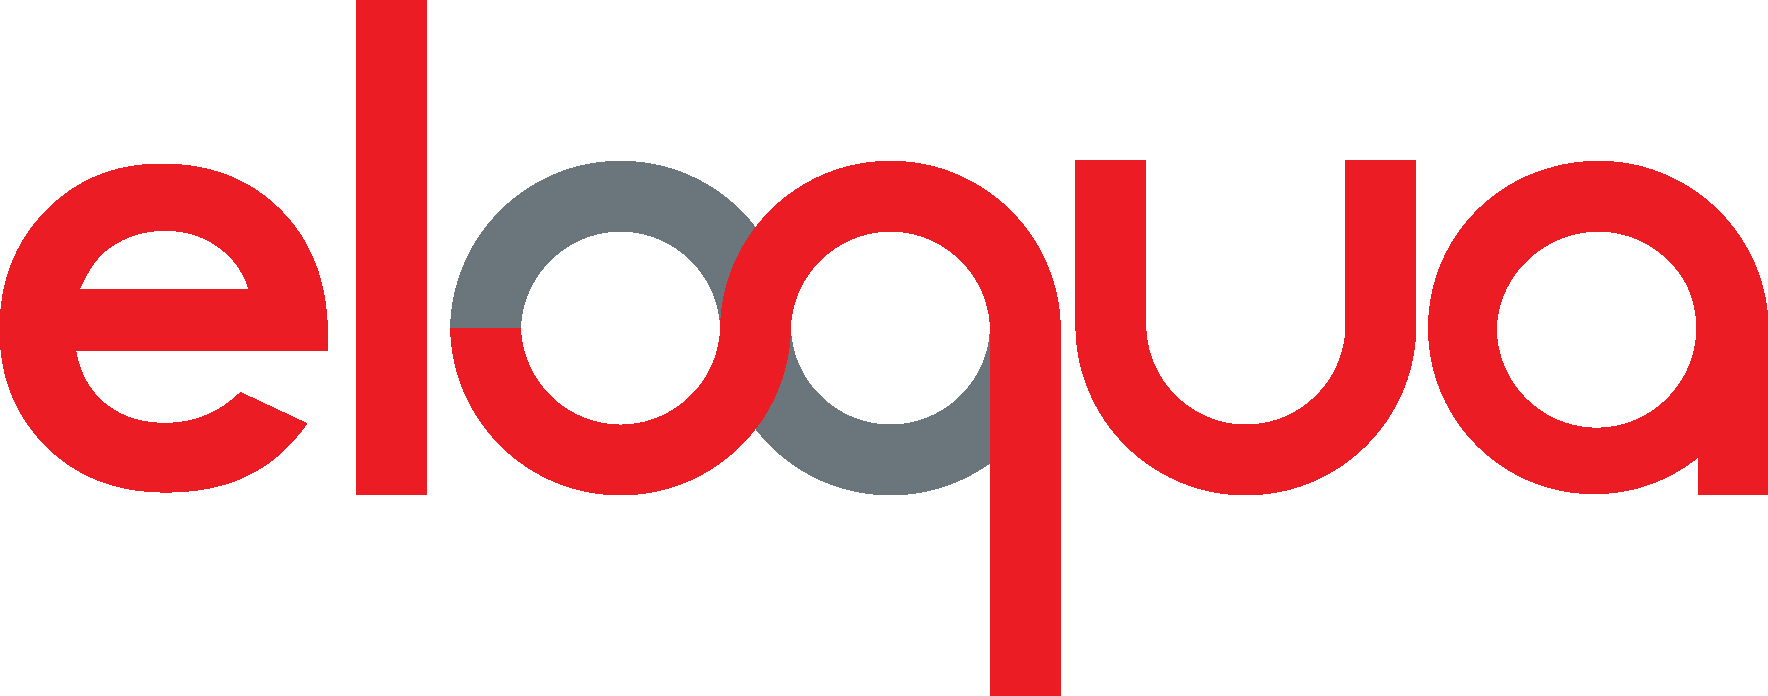 Eloqua is a software as a service (SaaS) platform for marketing automation offered by Oracle that aims to help B2B marketers and organizations manage marketing campaigns and sales lead generation.